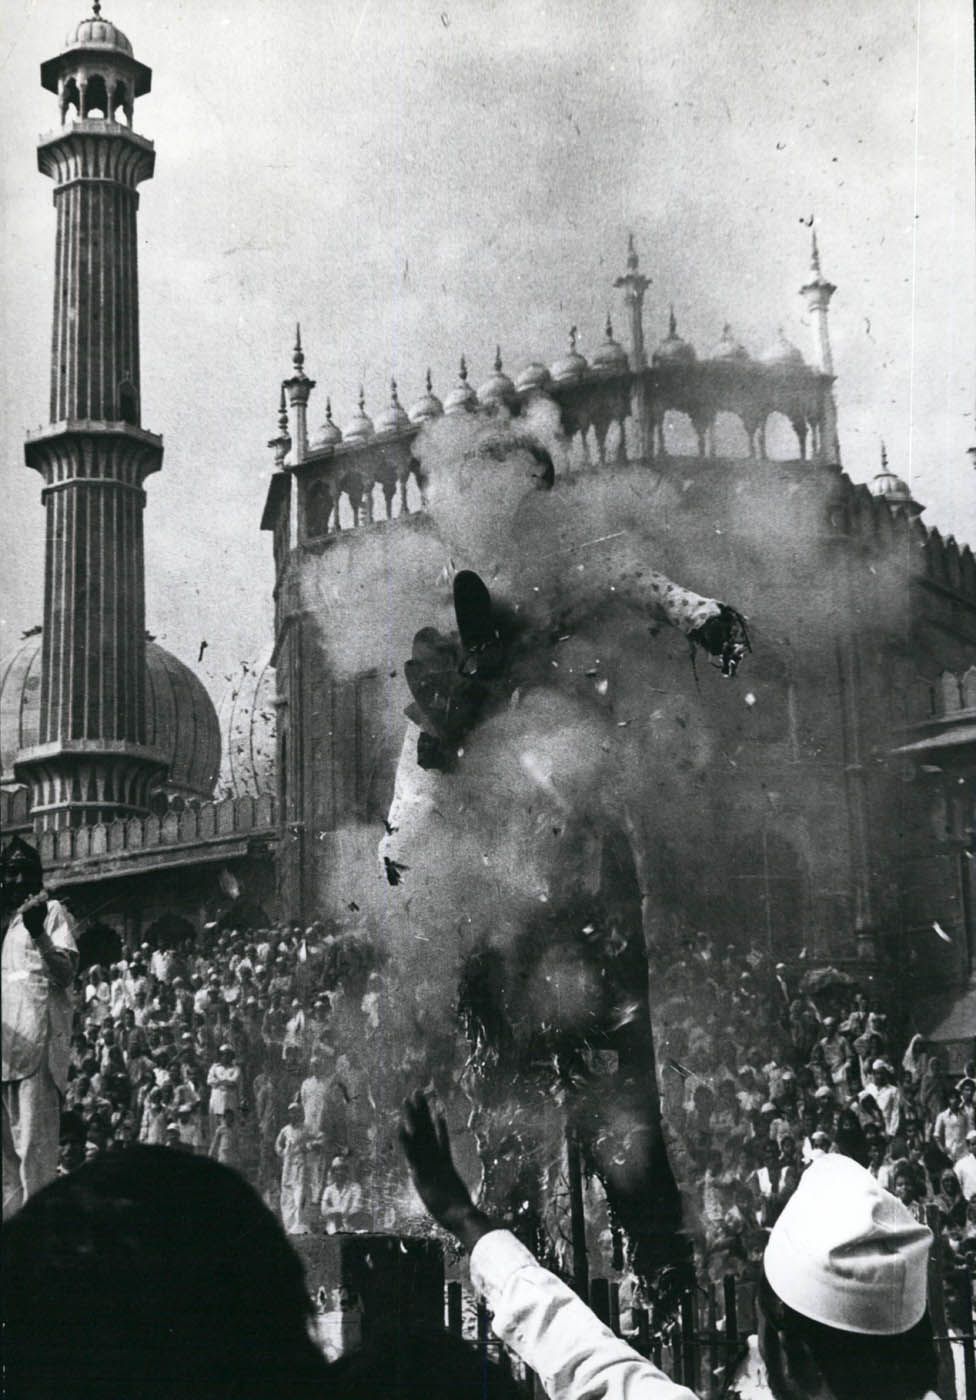 Demonstrators outside the Grand Mosque burn an effigy in protest against the building's seizure